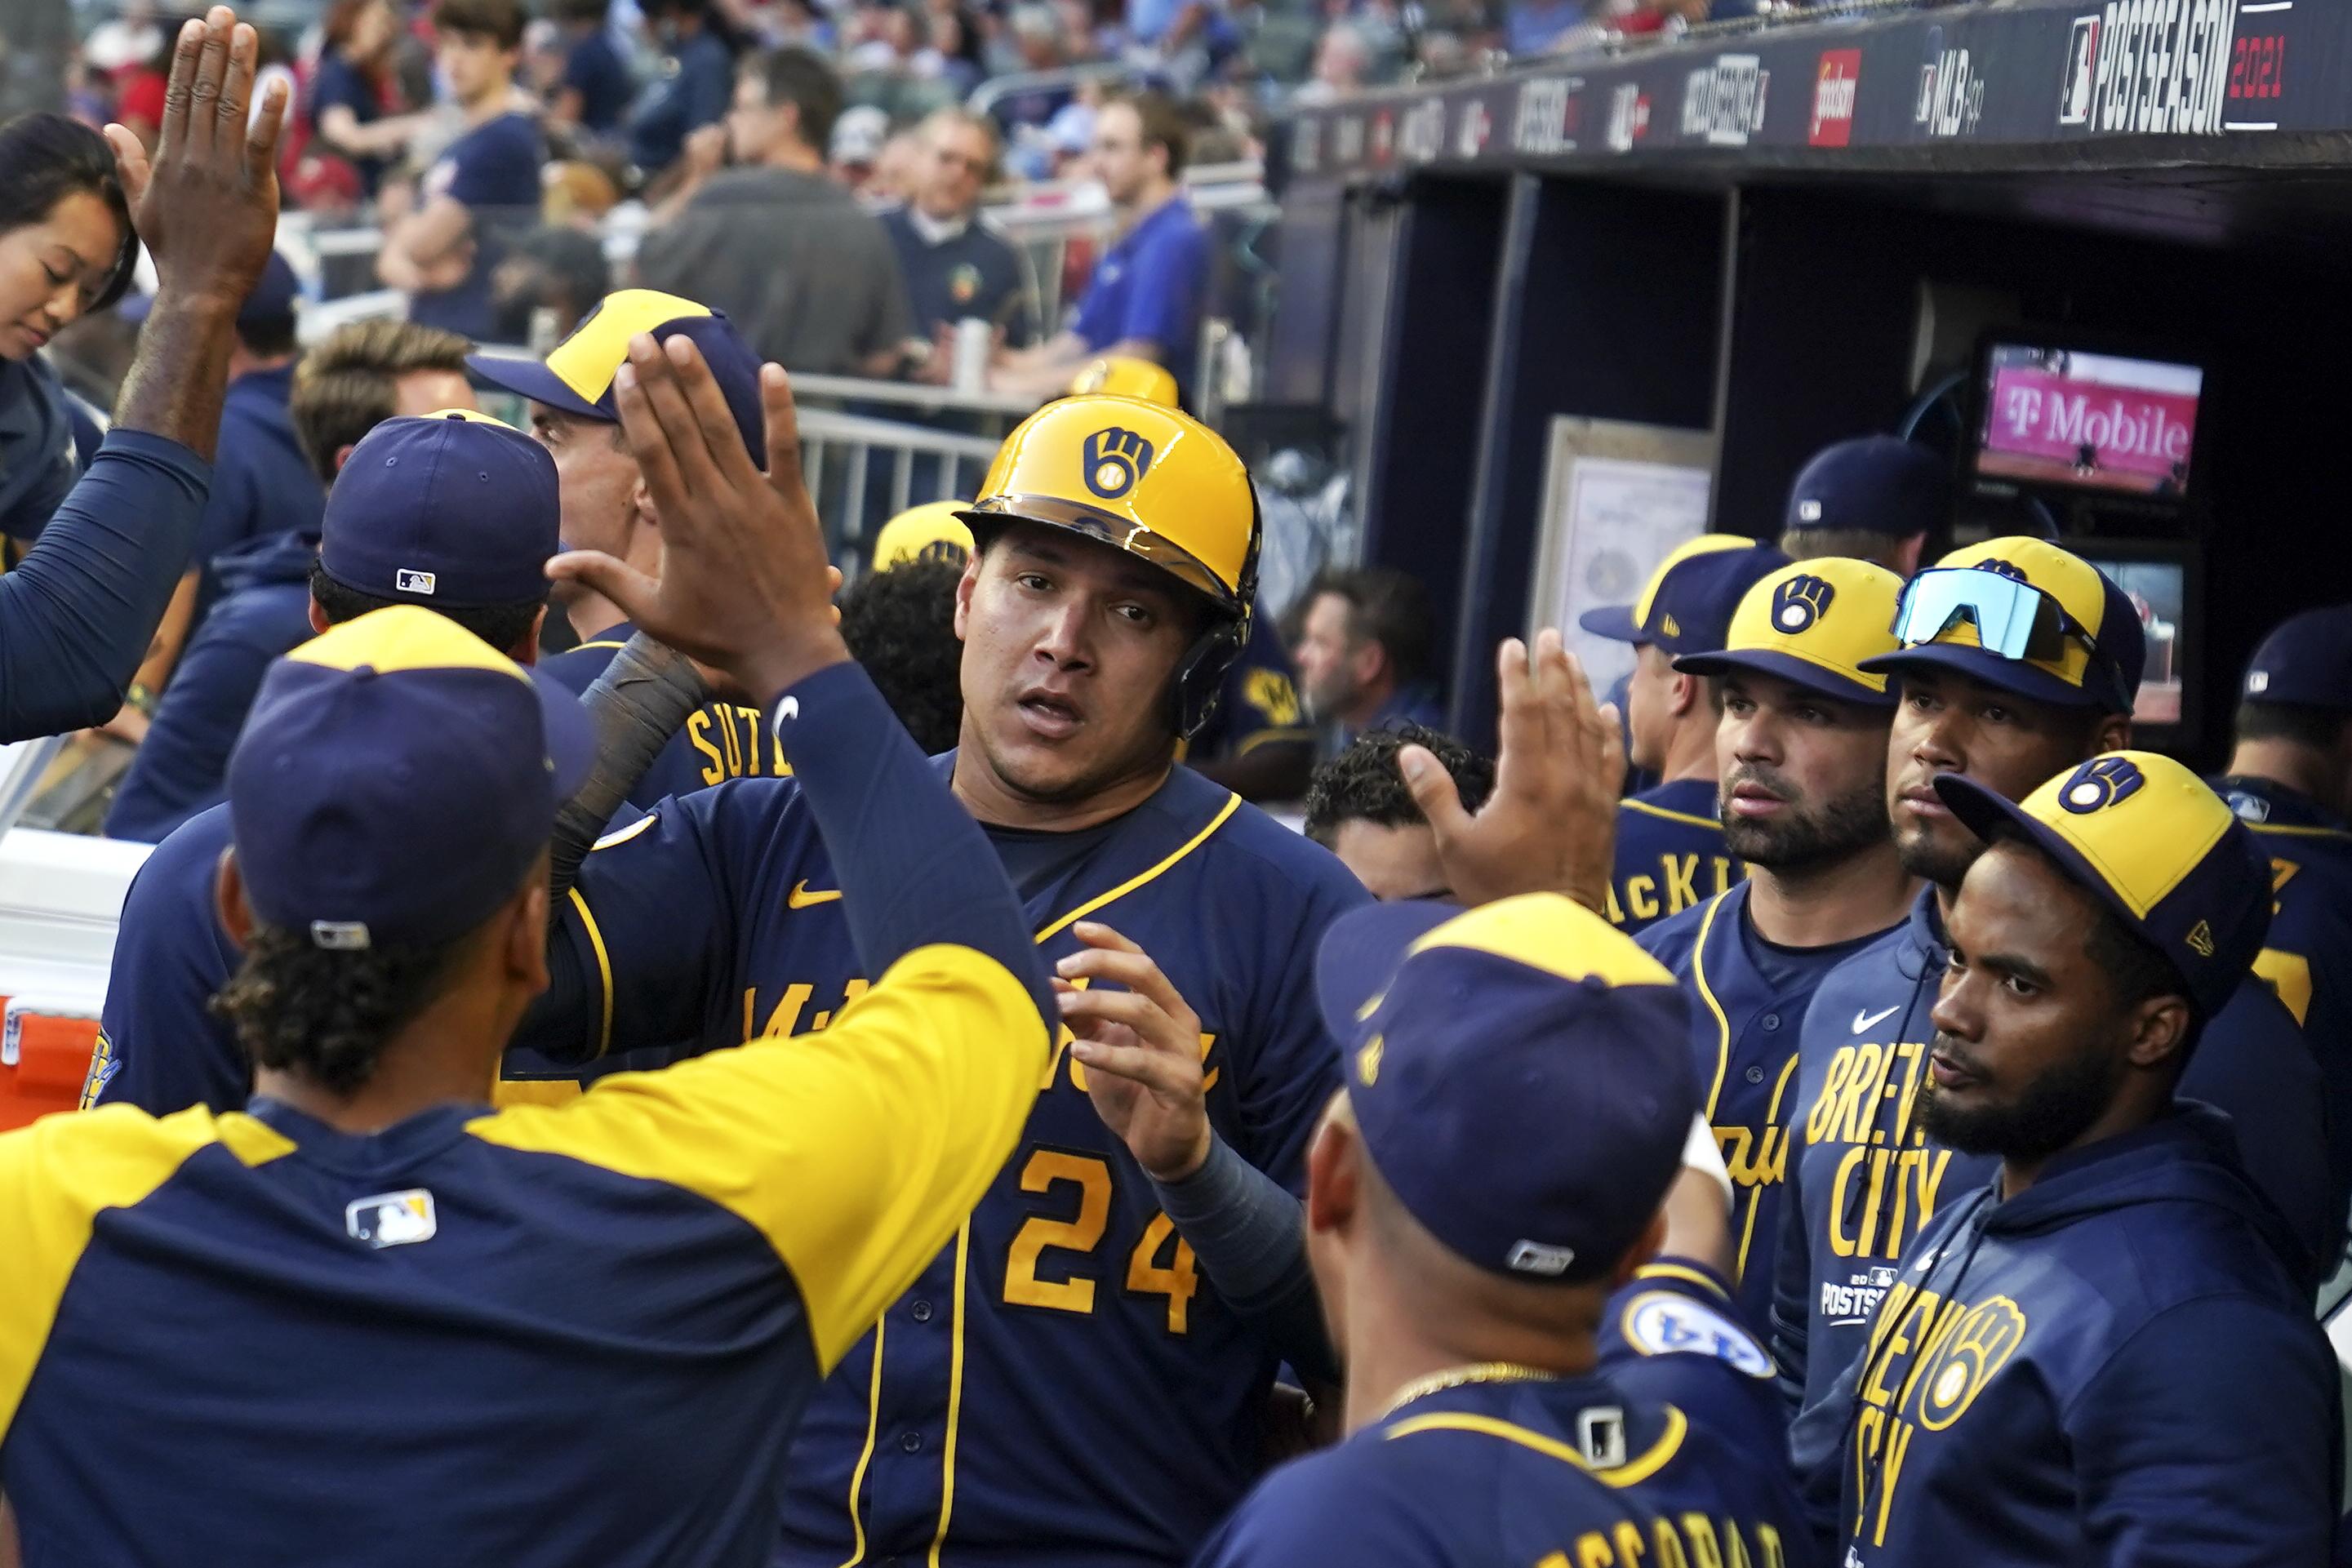 Brewers may need lineup upgrade to end postseason misery AP News